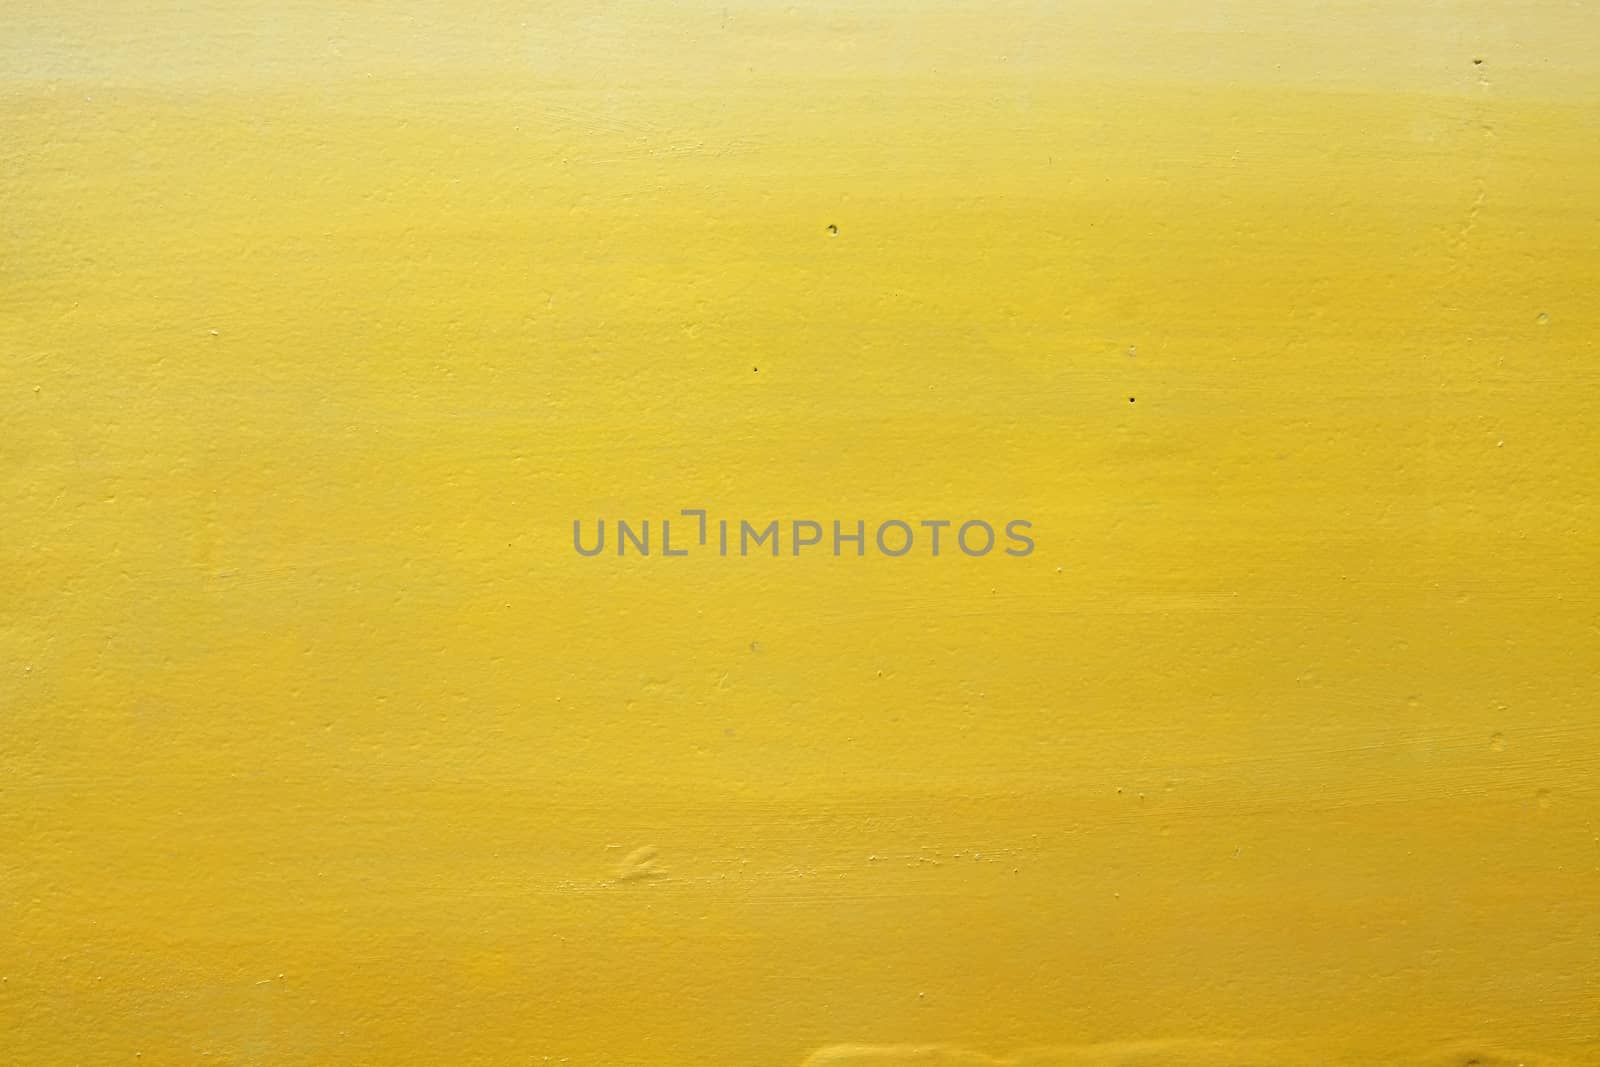 yellow painted on cement pot for background and wallpaper